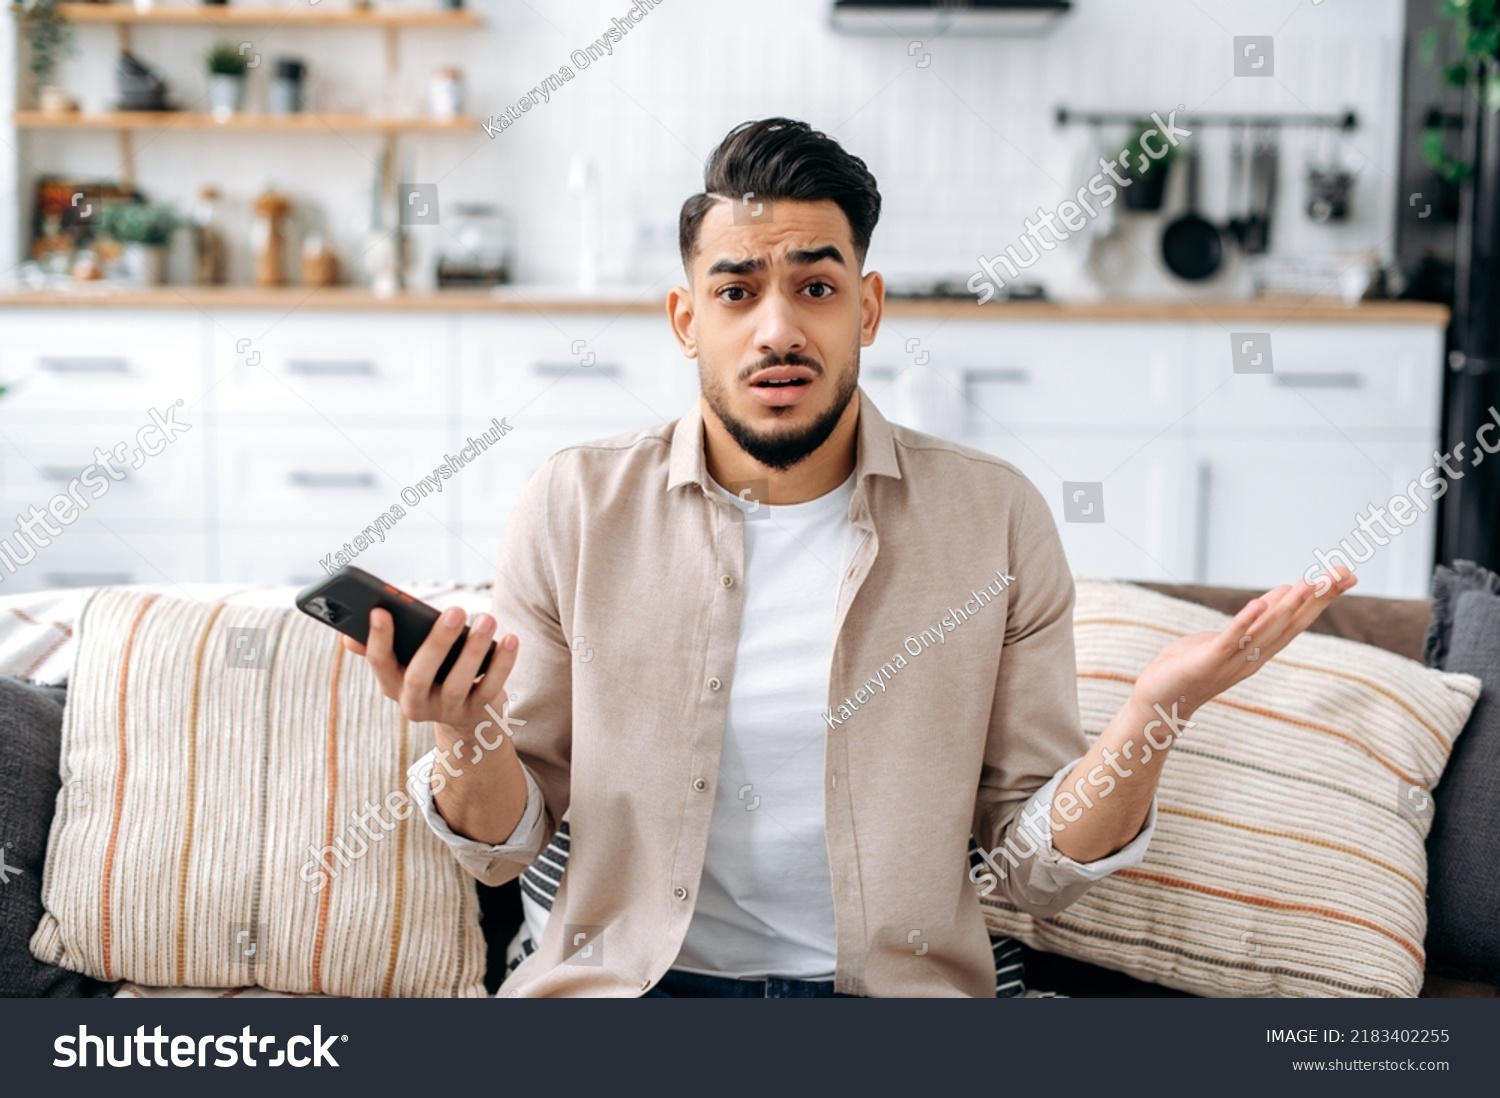 Confused puzzled indian or arabian guy in casual clothes, sits on a sofa in an interior living room, holds a smartphone in his hand, looks questioningly at the camera, spreading his arms around #2183402255